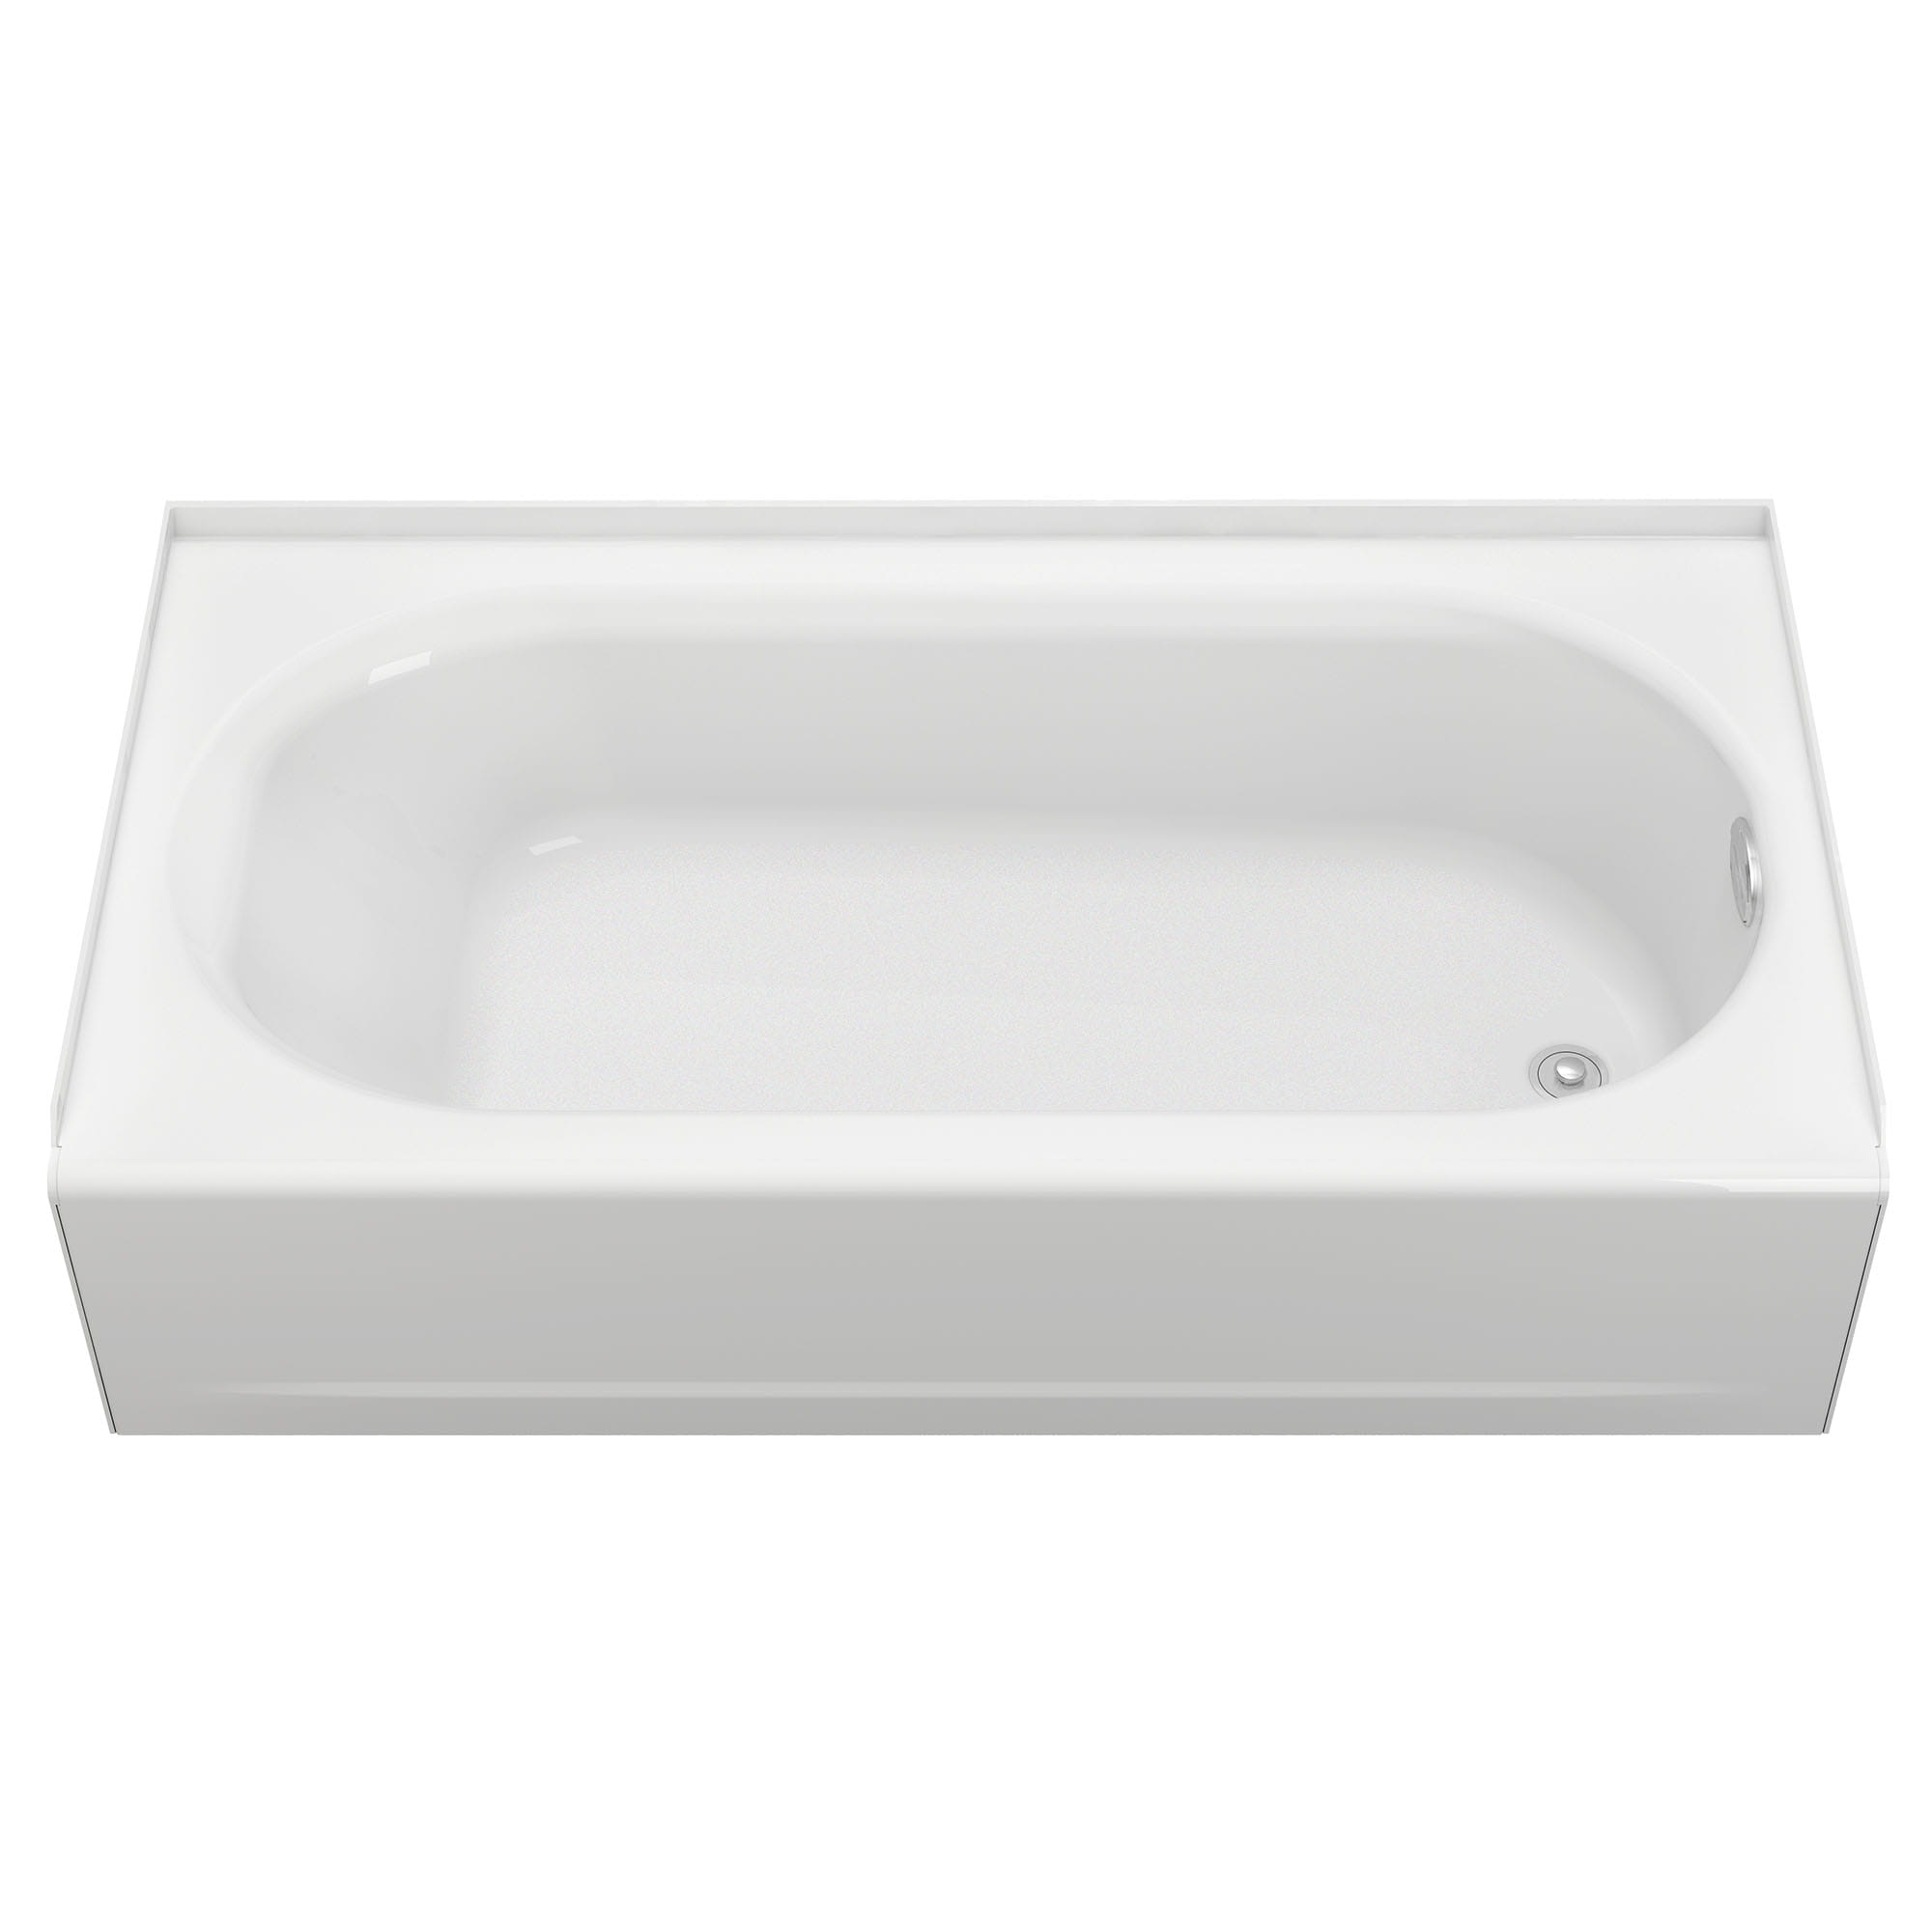 Princeton® Americast® 60 x 34-Inch Integral Apron Bathtub Above Floor Rough Right-Hand Outlet Luxury Ledge with Integral Drain